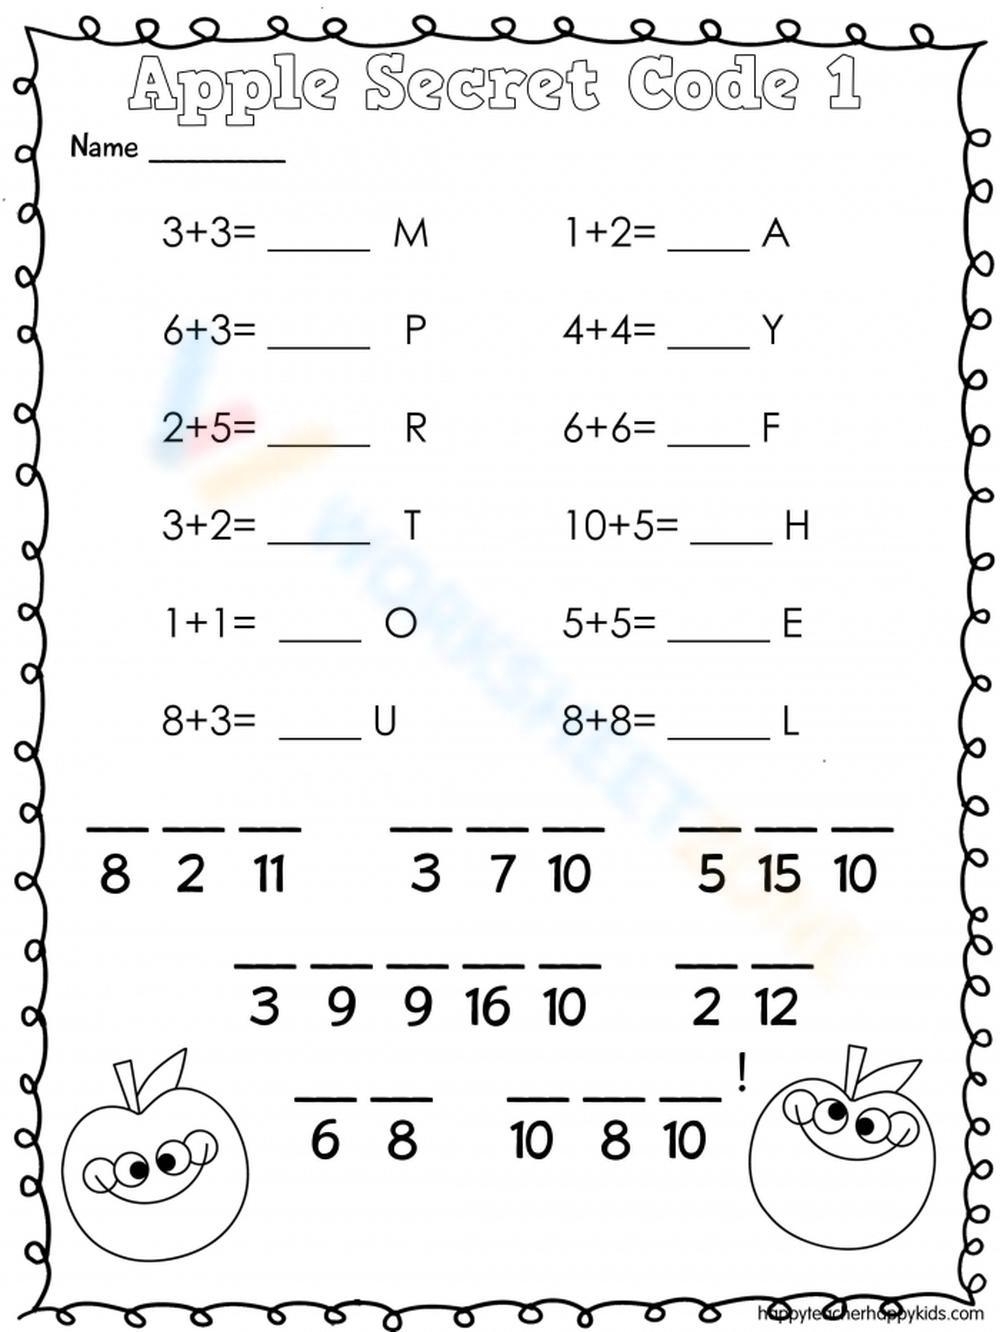 Free Printable Crack The Code Worksheet For Students - Crack The Code Worksheets Printable Free